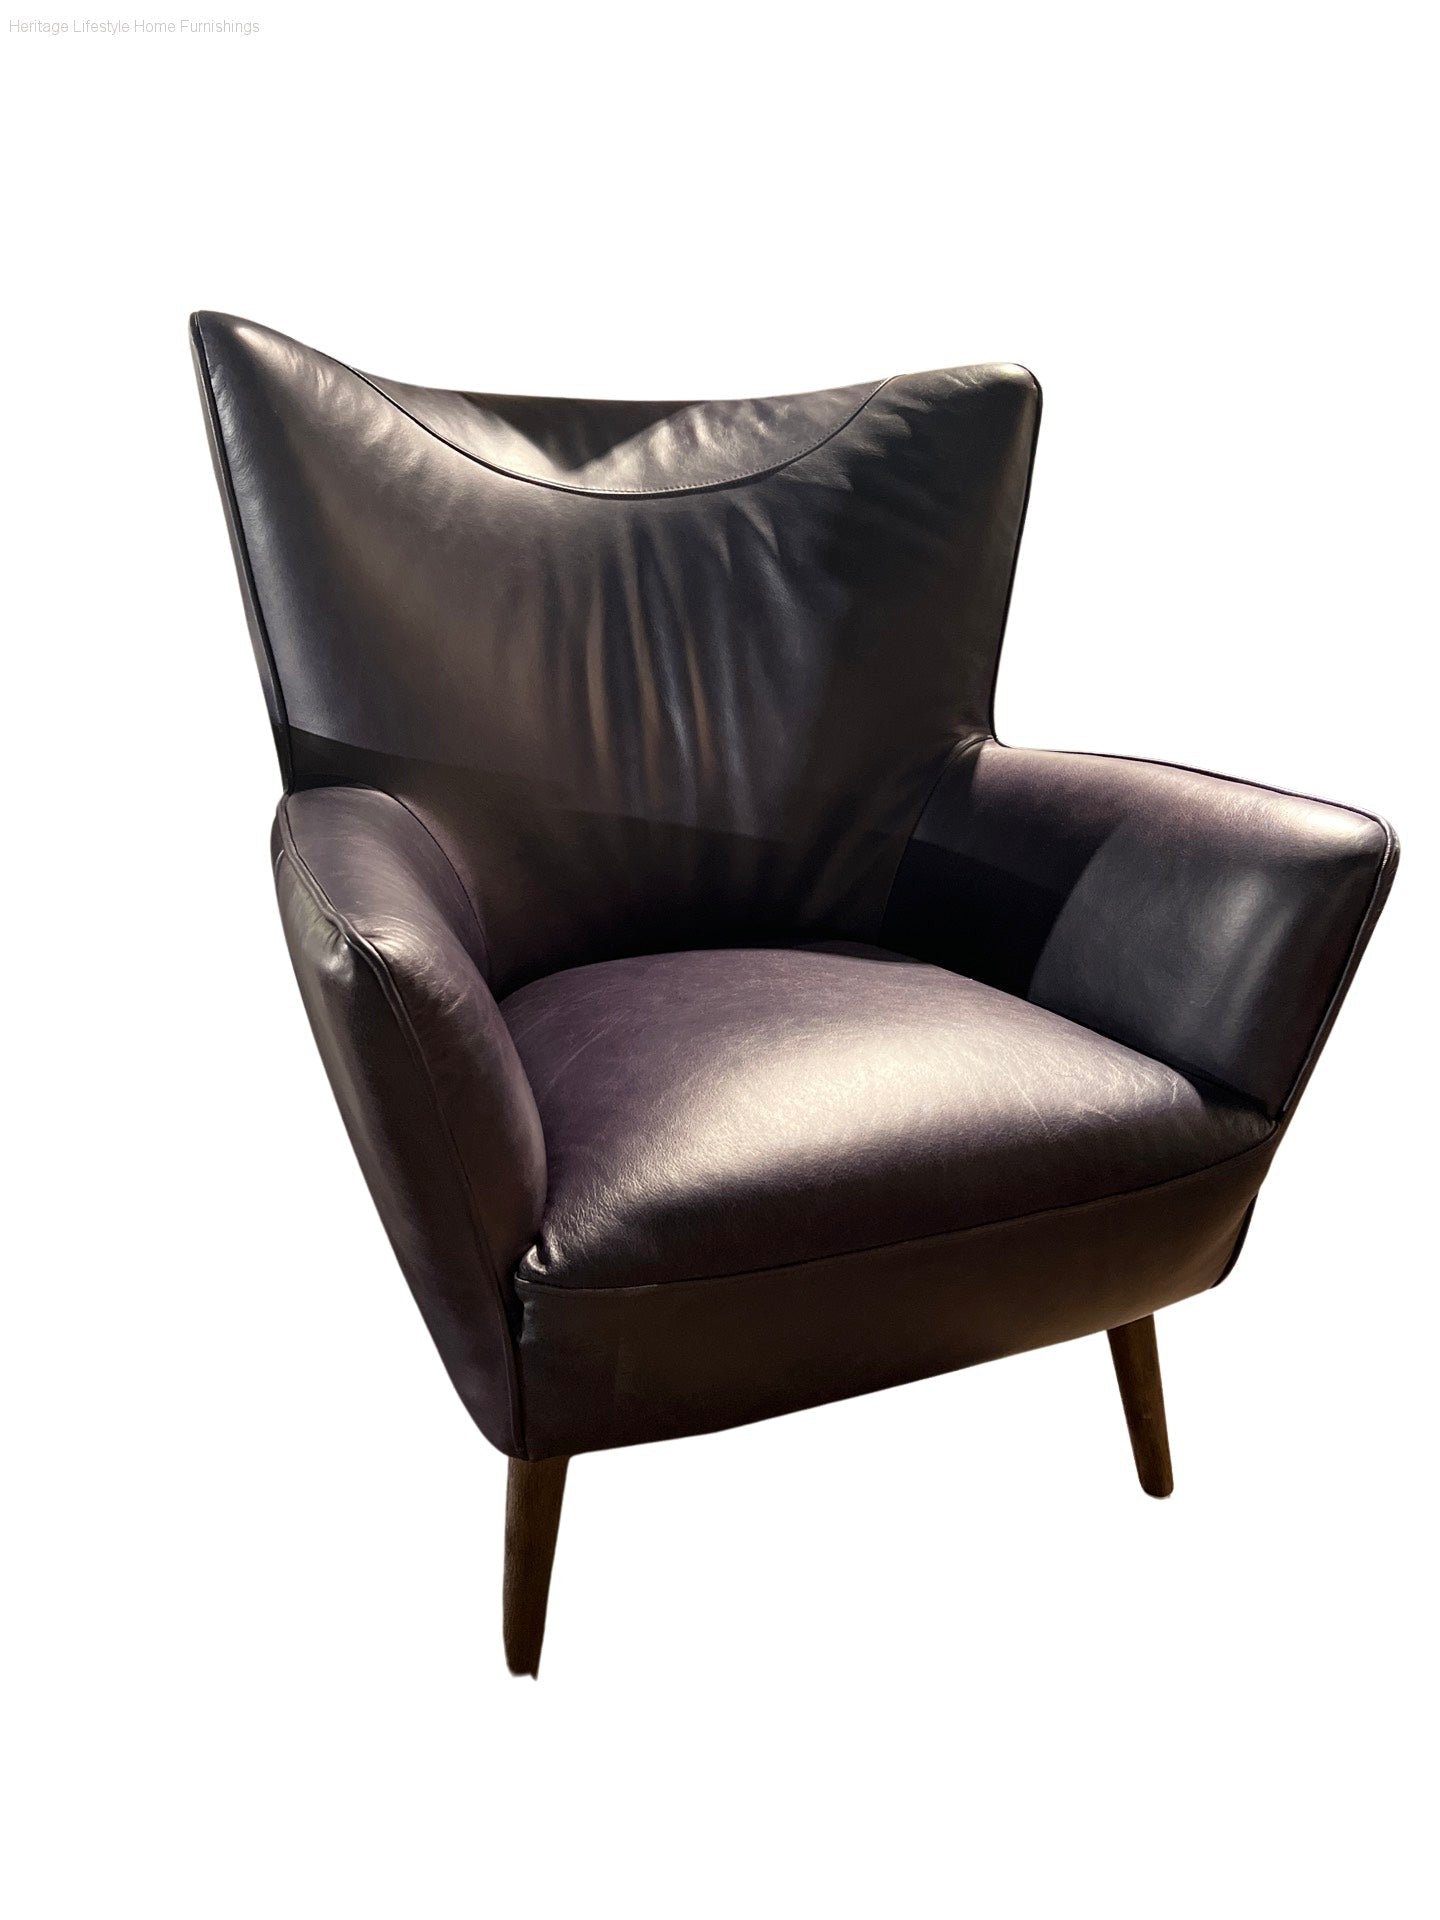 996-1(2A) Leather Accent Chair Furniture Stores Burlington Ontario Near Me HLHF